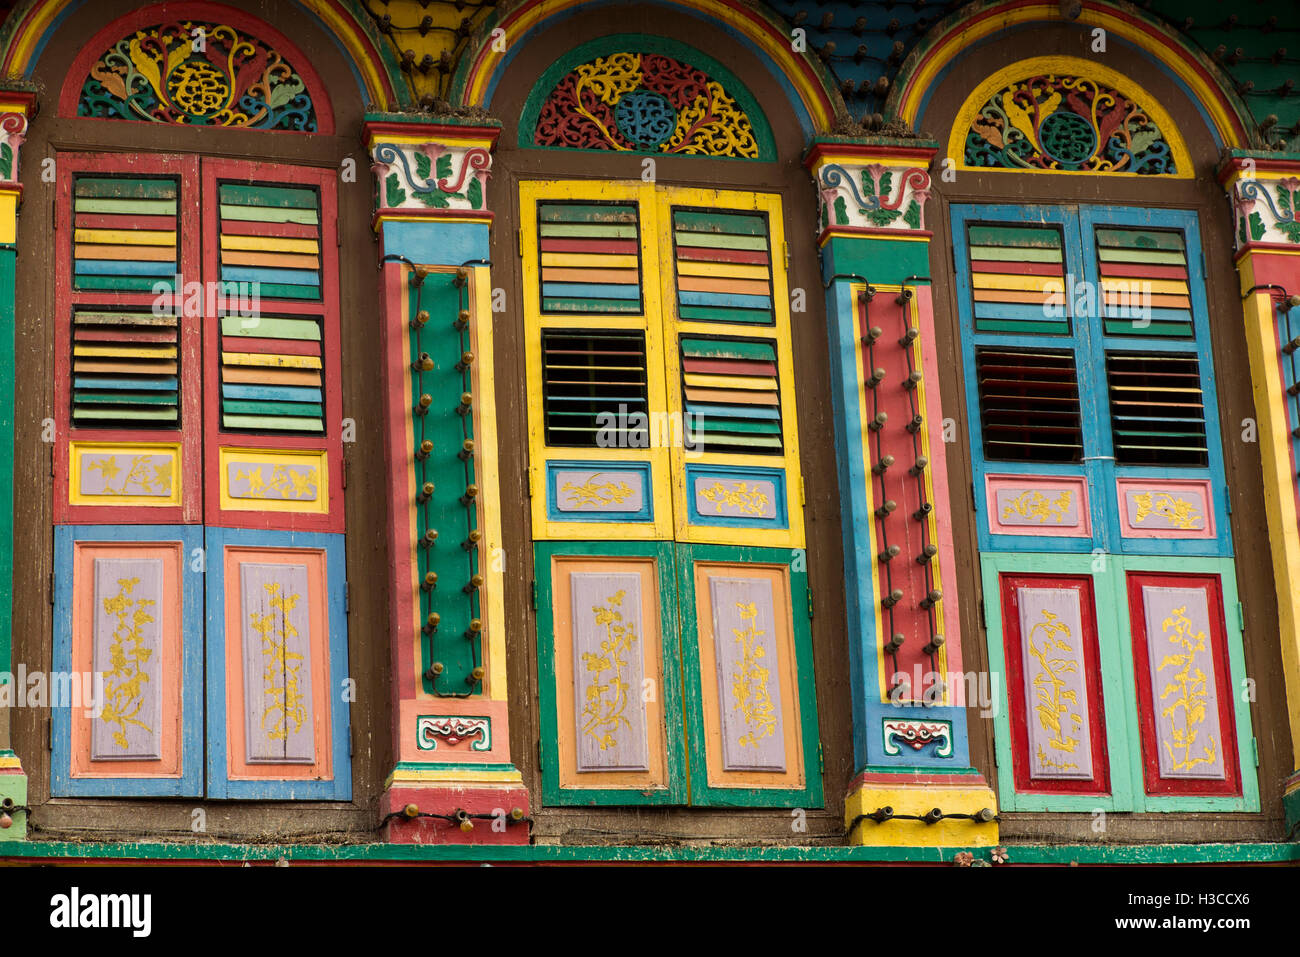 Singapore, Little India, Kerbau Road, Chinese merchant Tan Tang Niah’s ancient house colourfully painted windows Stock Photo